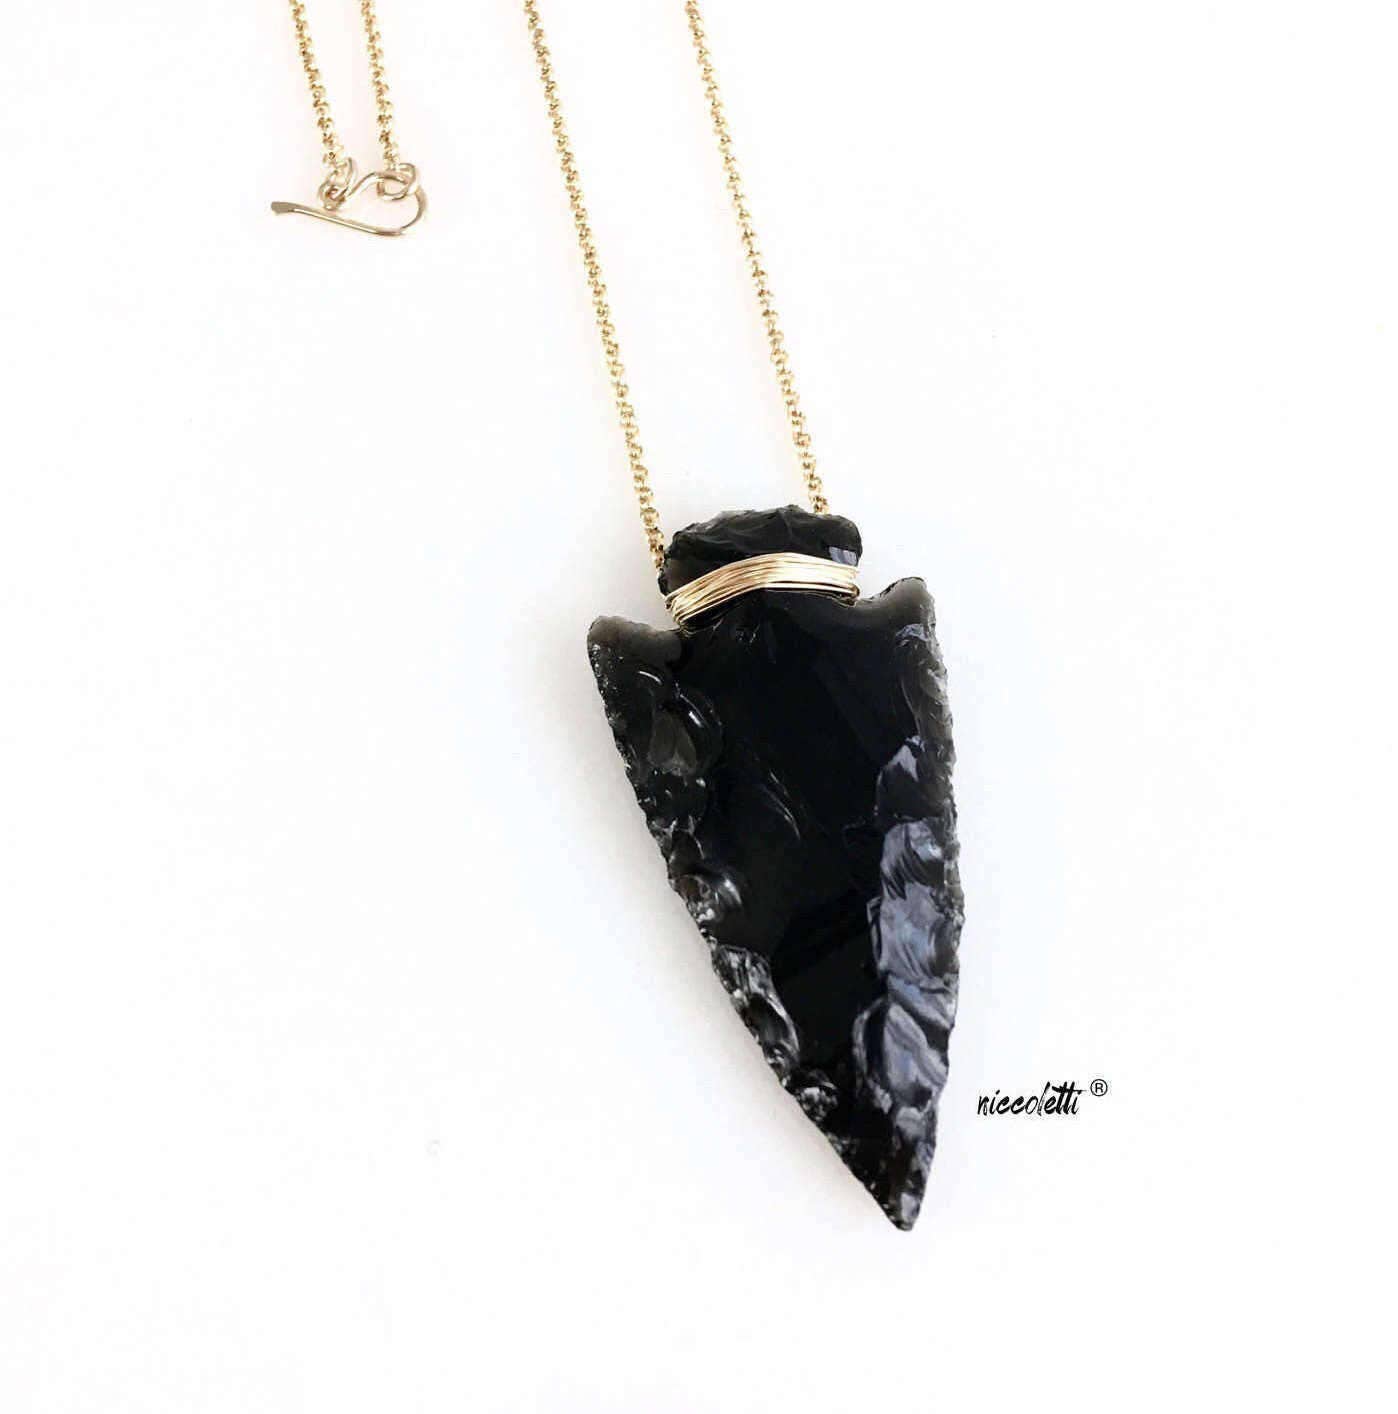 Obsidian Arrowhead Necklace / Black and Gold Arrowhead / Bohemian Jewelry / Black Arrowhead Necklace / Raw Stone Jewelry